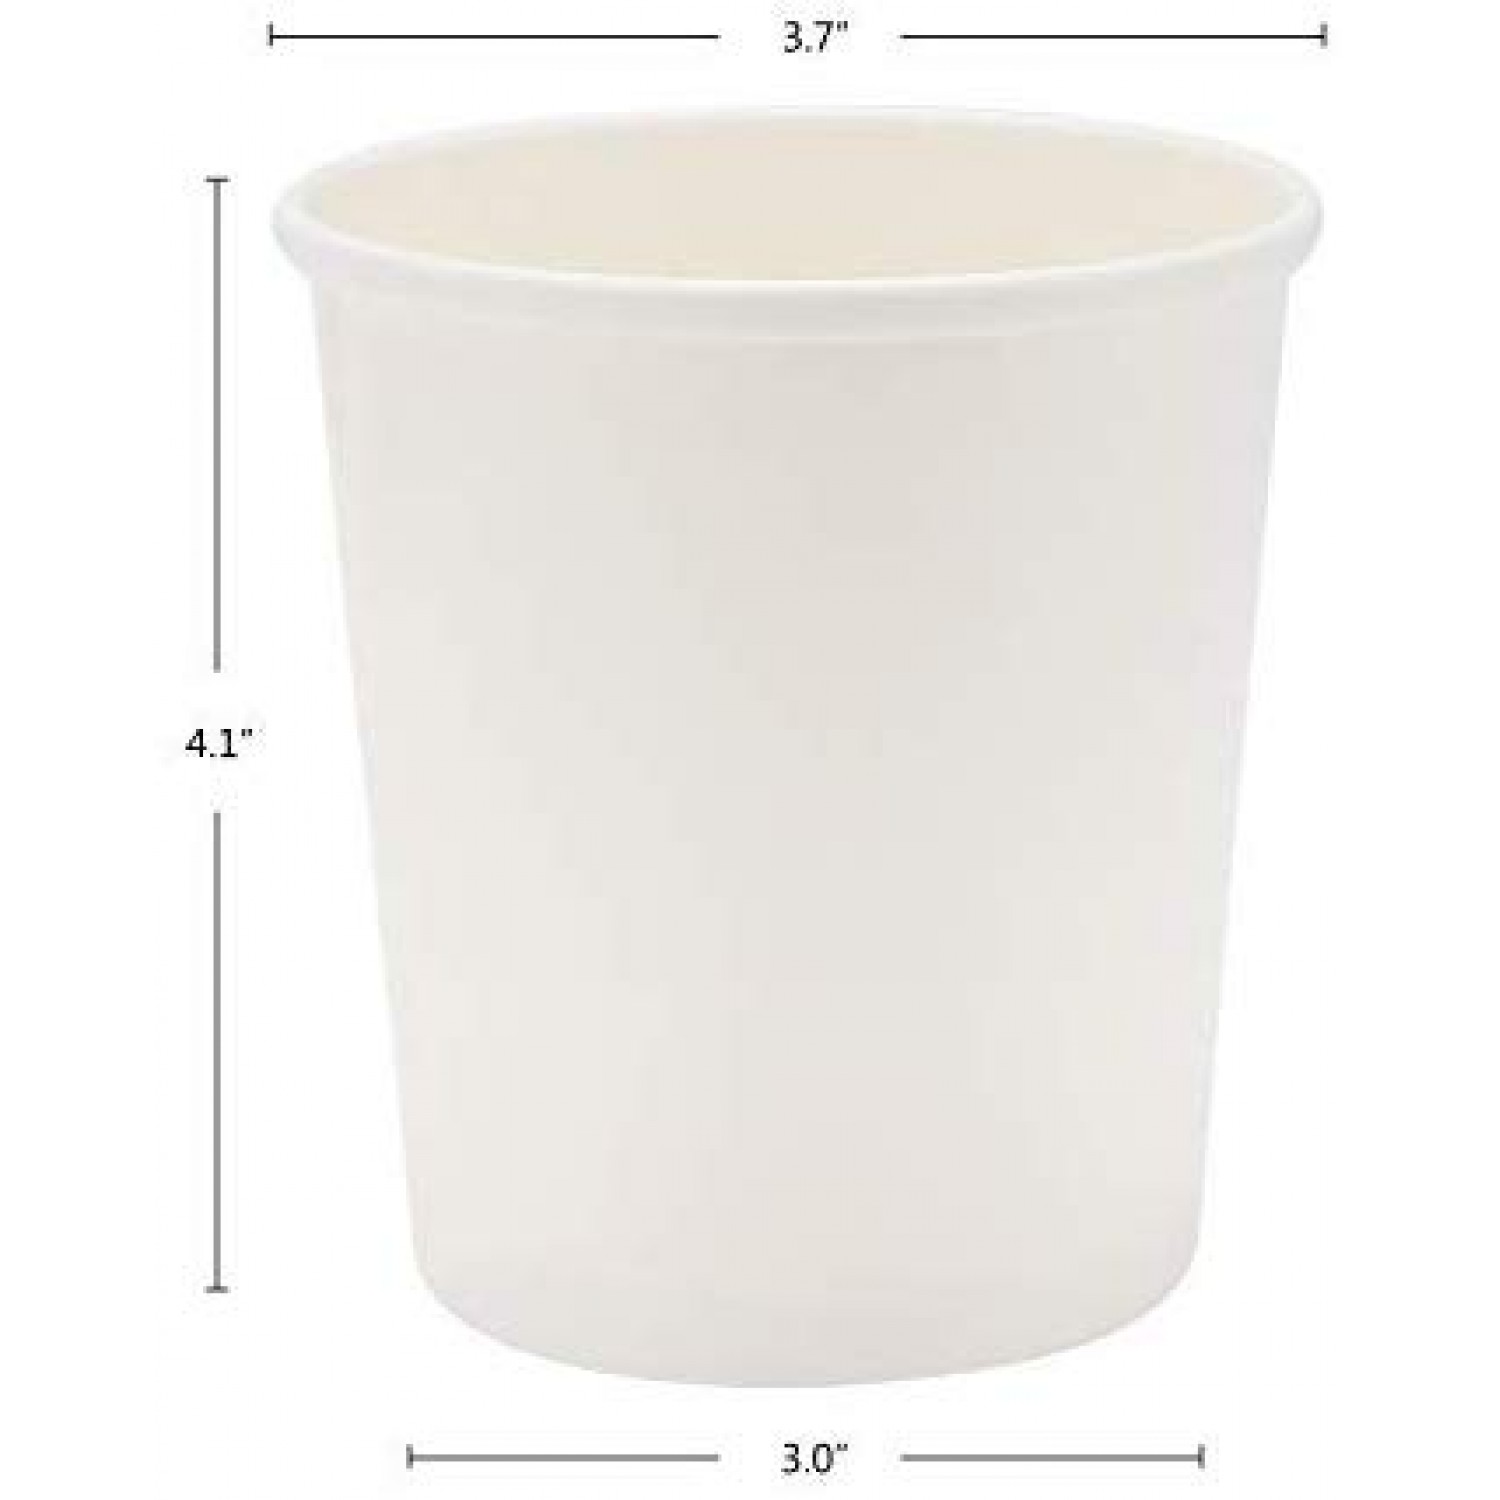 [100 Count] 8 oz Disposable White Paper Soup Containers with Plastic Lids -  Half Pint Ice Cream Containers, Frozen Yogurt Cups, Restaurant